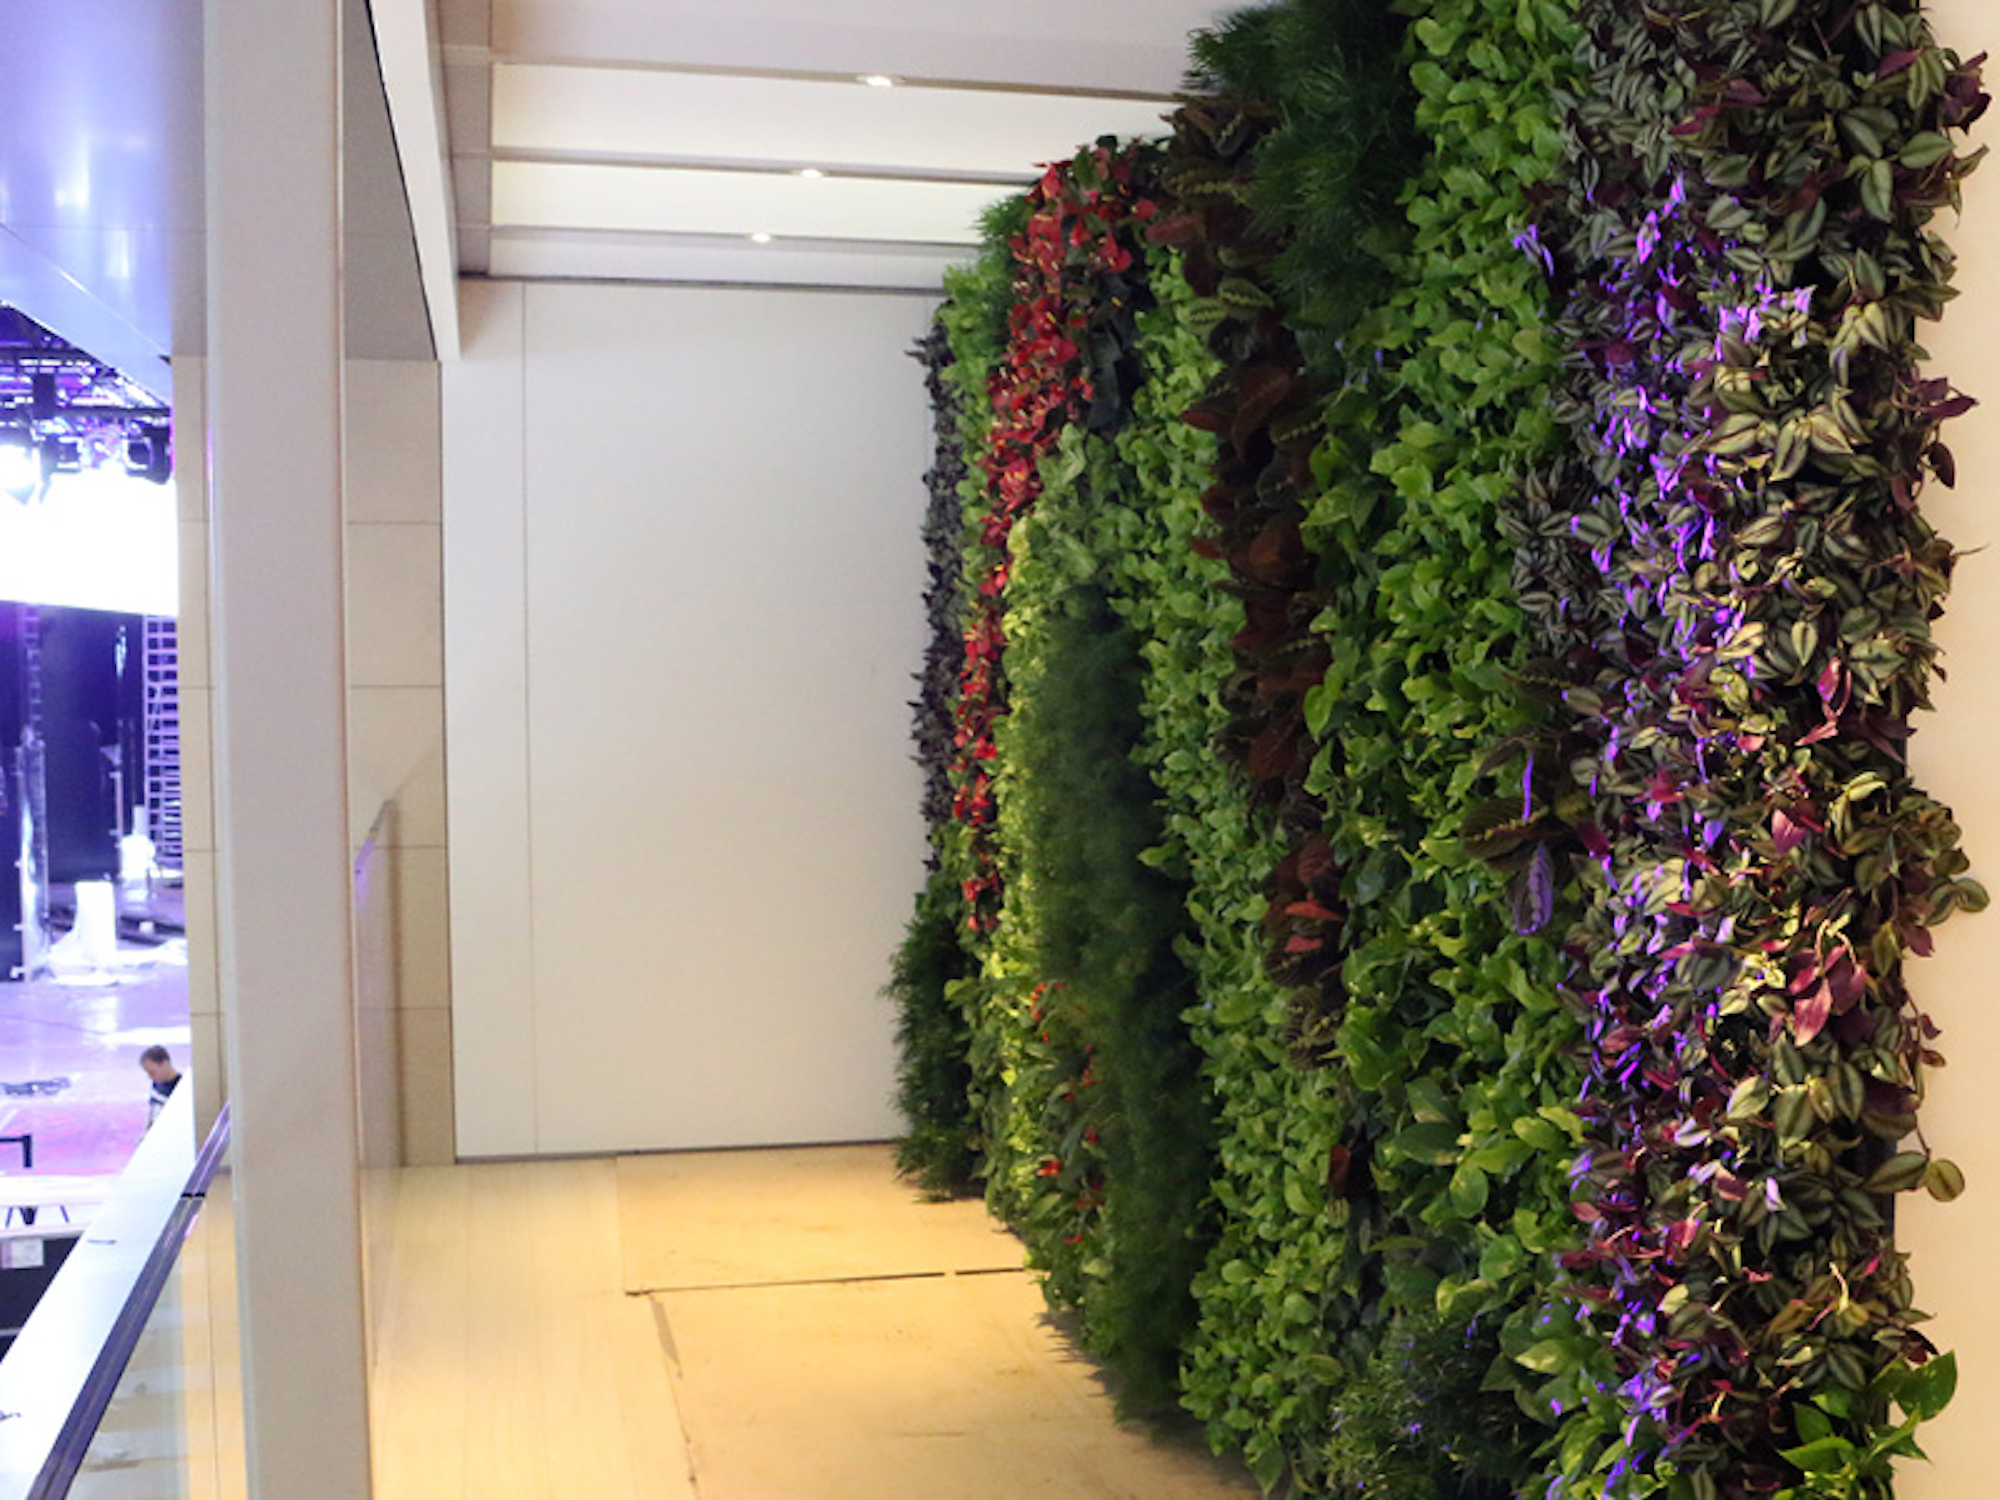 plants in a internal living wall at an exhibition